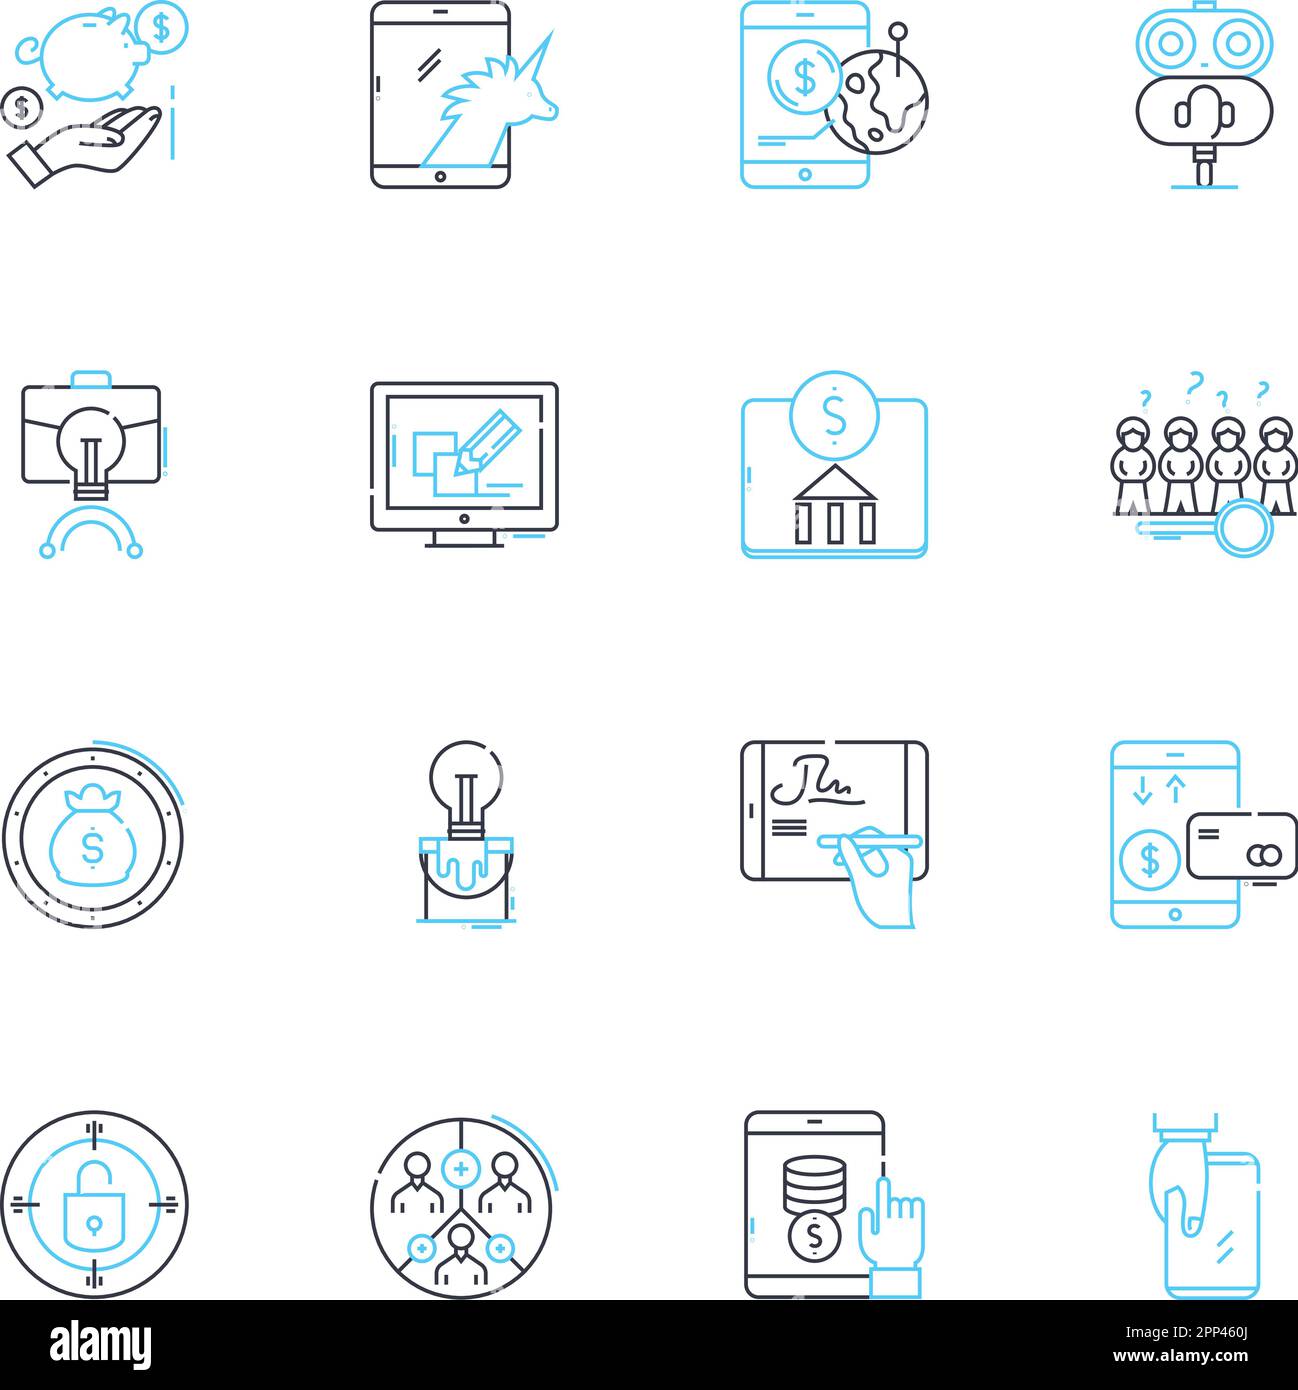 Budgeting techniques linear icons set. Frugality, Allocation, Optimization, Prioritization, Planning, Limitation, Income line vector and concept signs Stock Vector